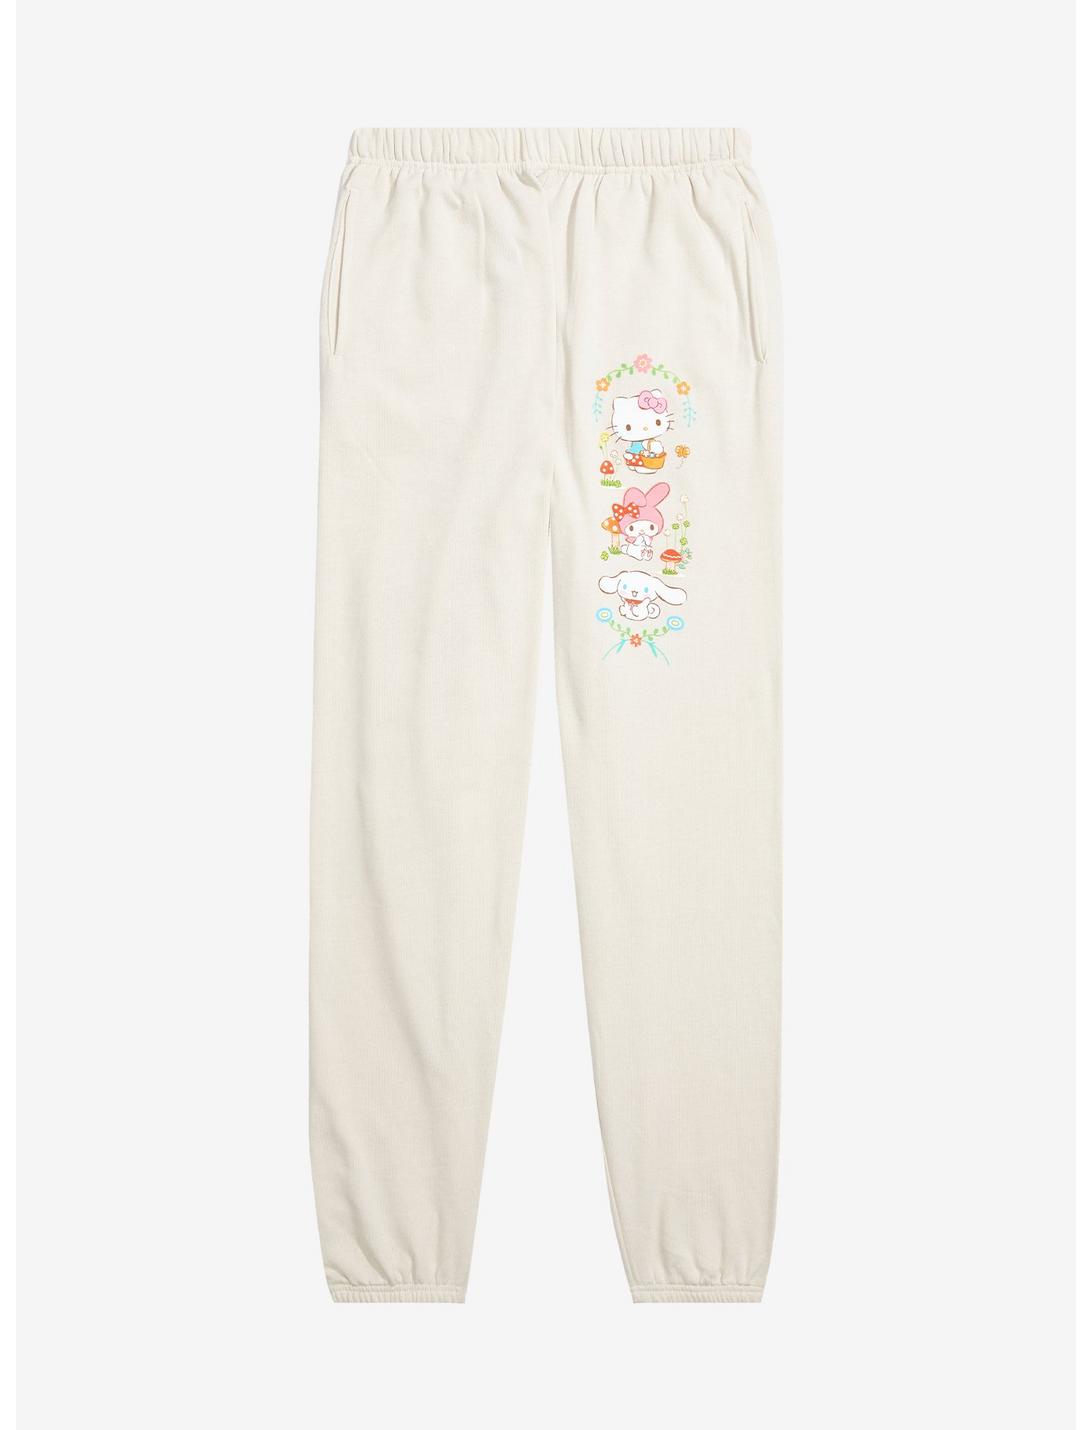 Sanrio Hello Kitty and Friends Mushroom Joggers - BoxLunch Exclusive, OATMEAL, hi-res